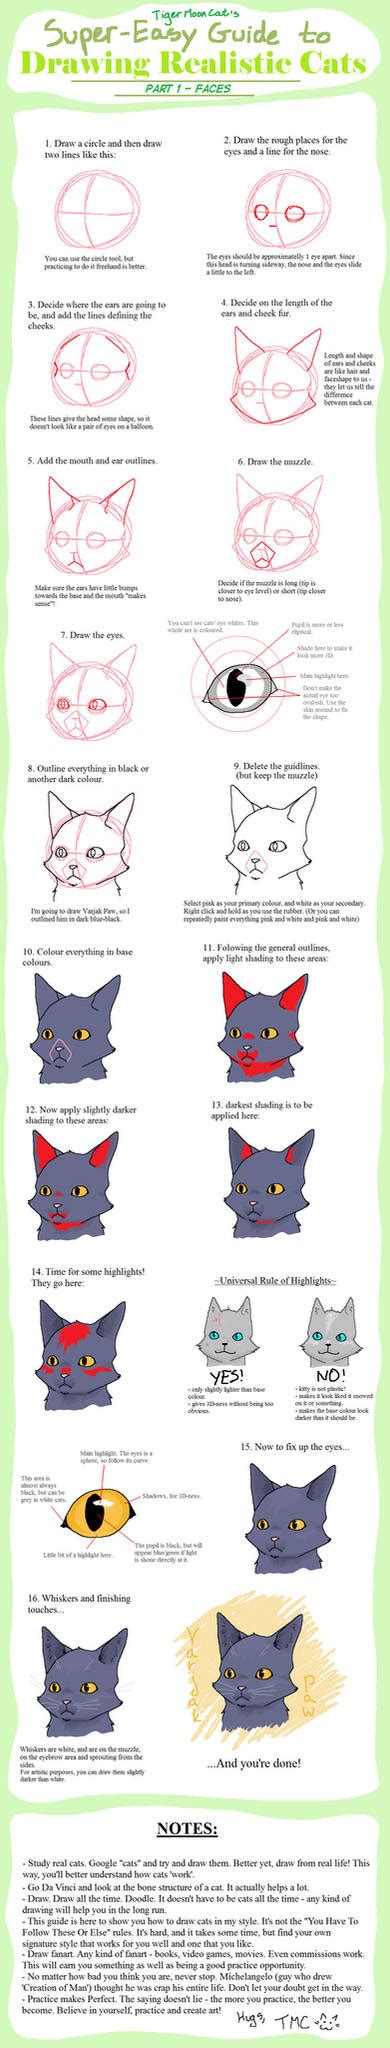 Super Easy Guide To Drawing Realistic Cats Faces By Tigermooncat On